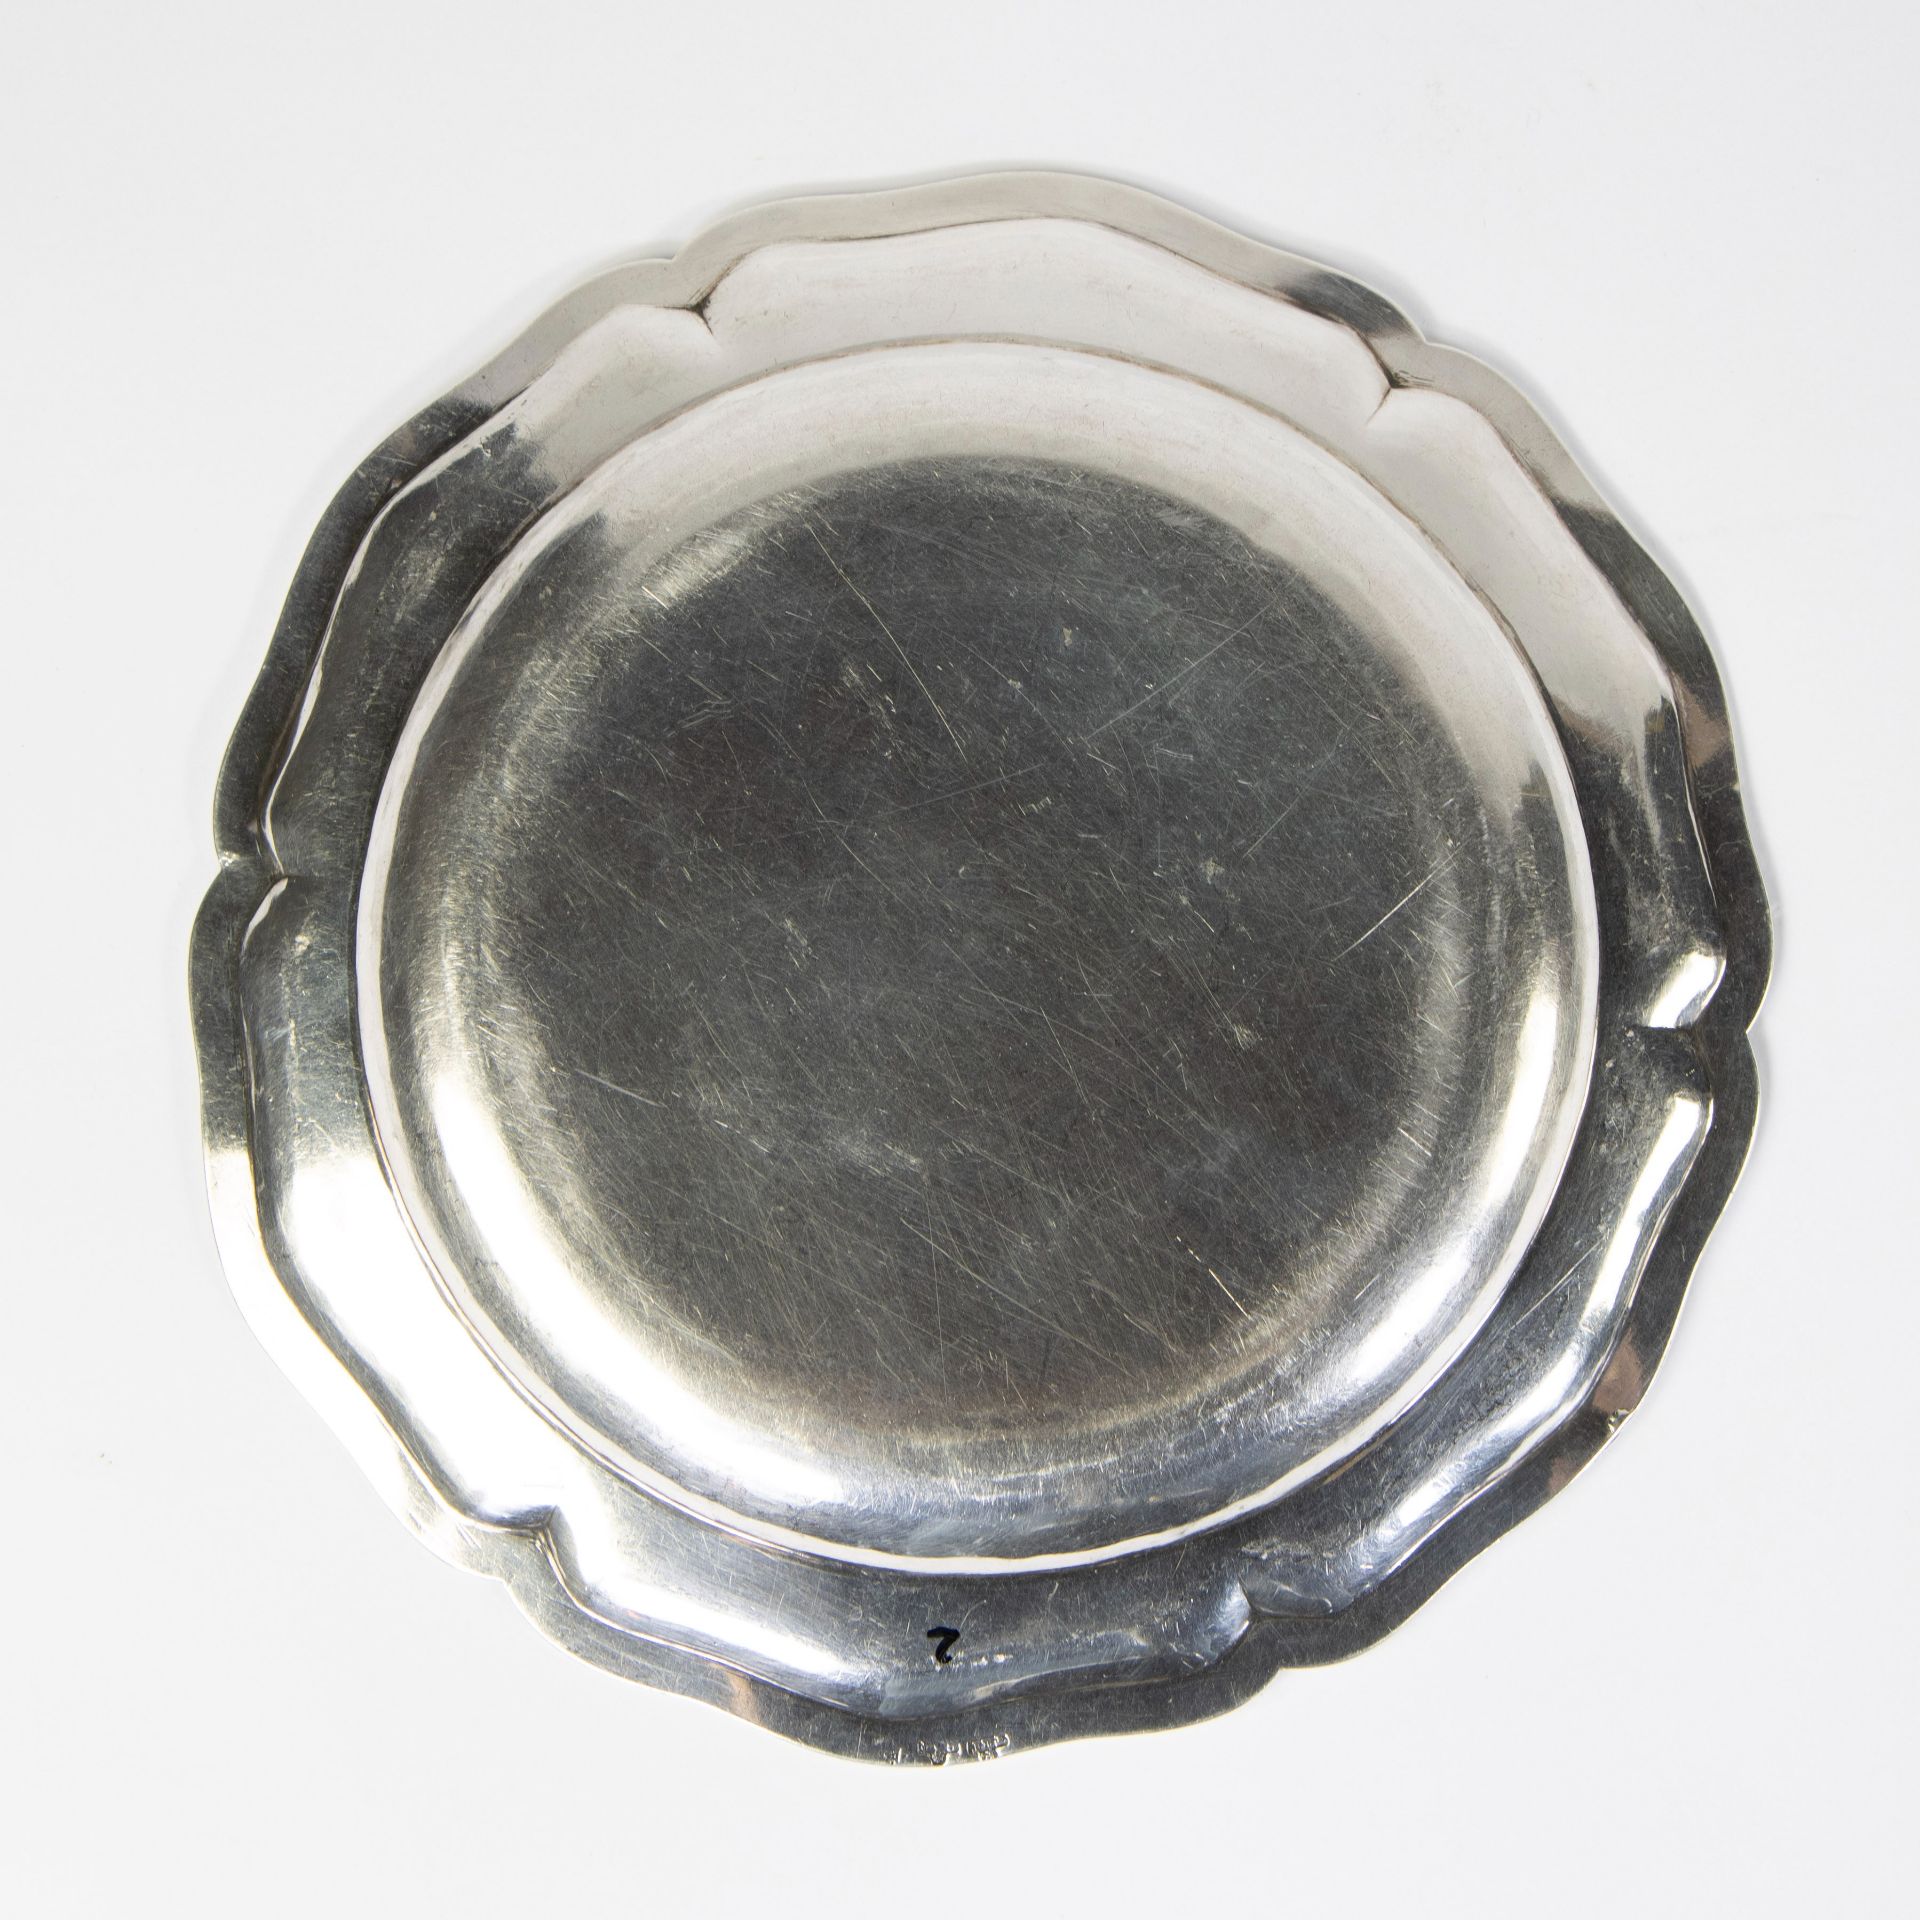 18th century Spanish silver plate - Image 3 of 4